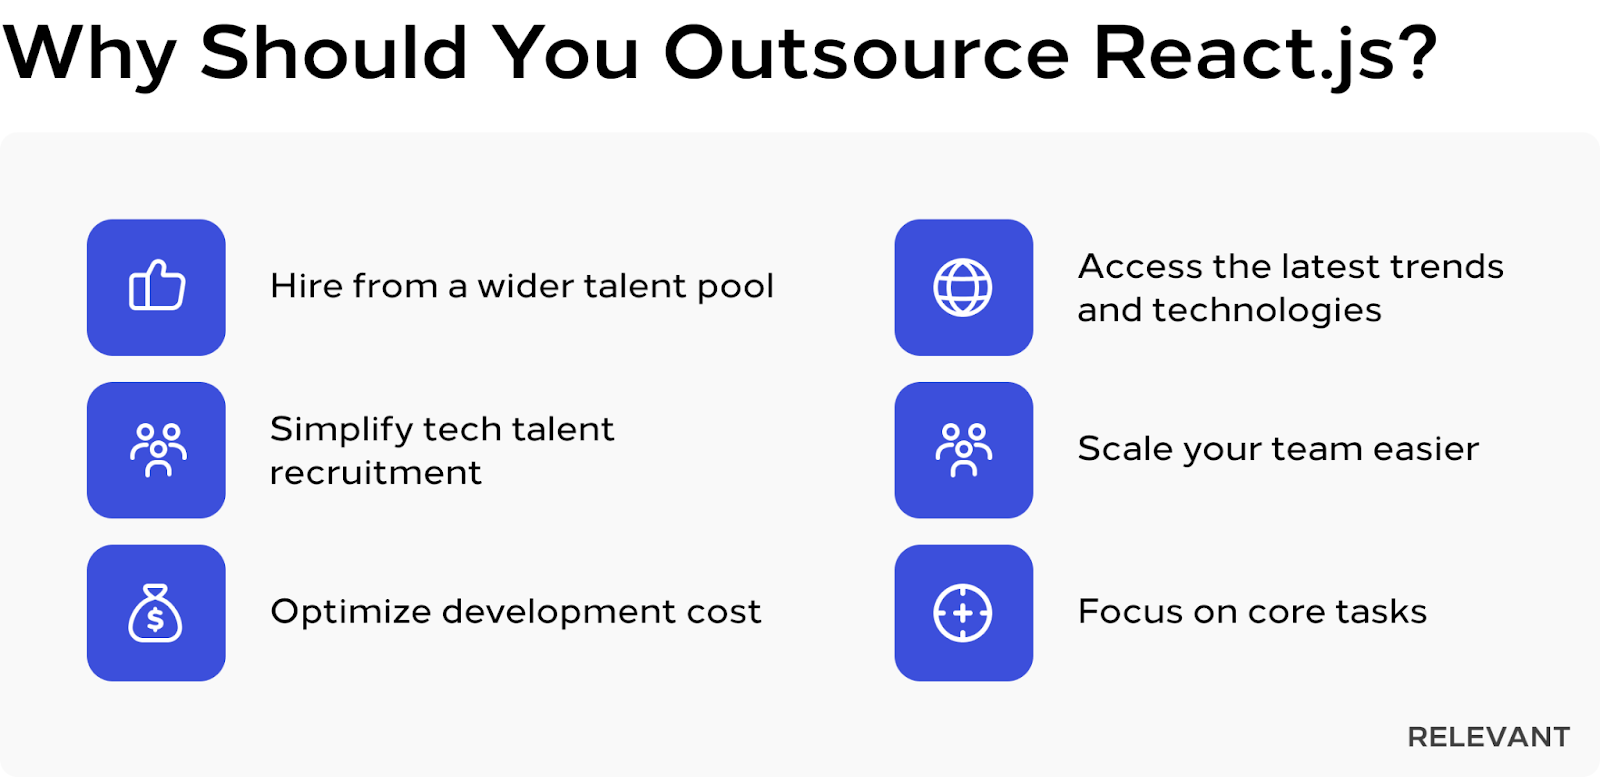 React.js outsourcing